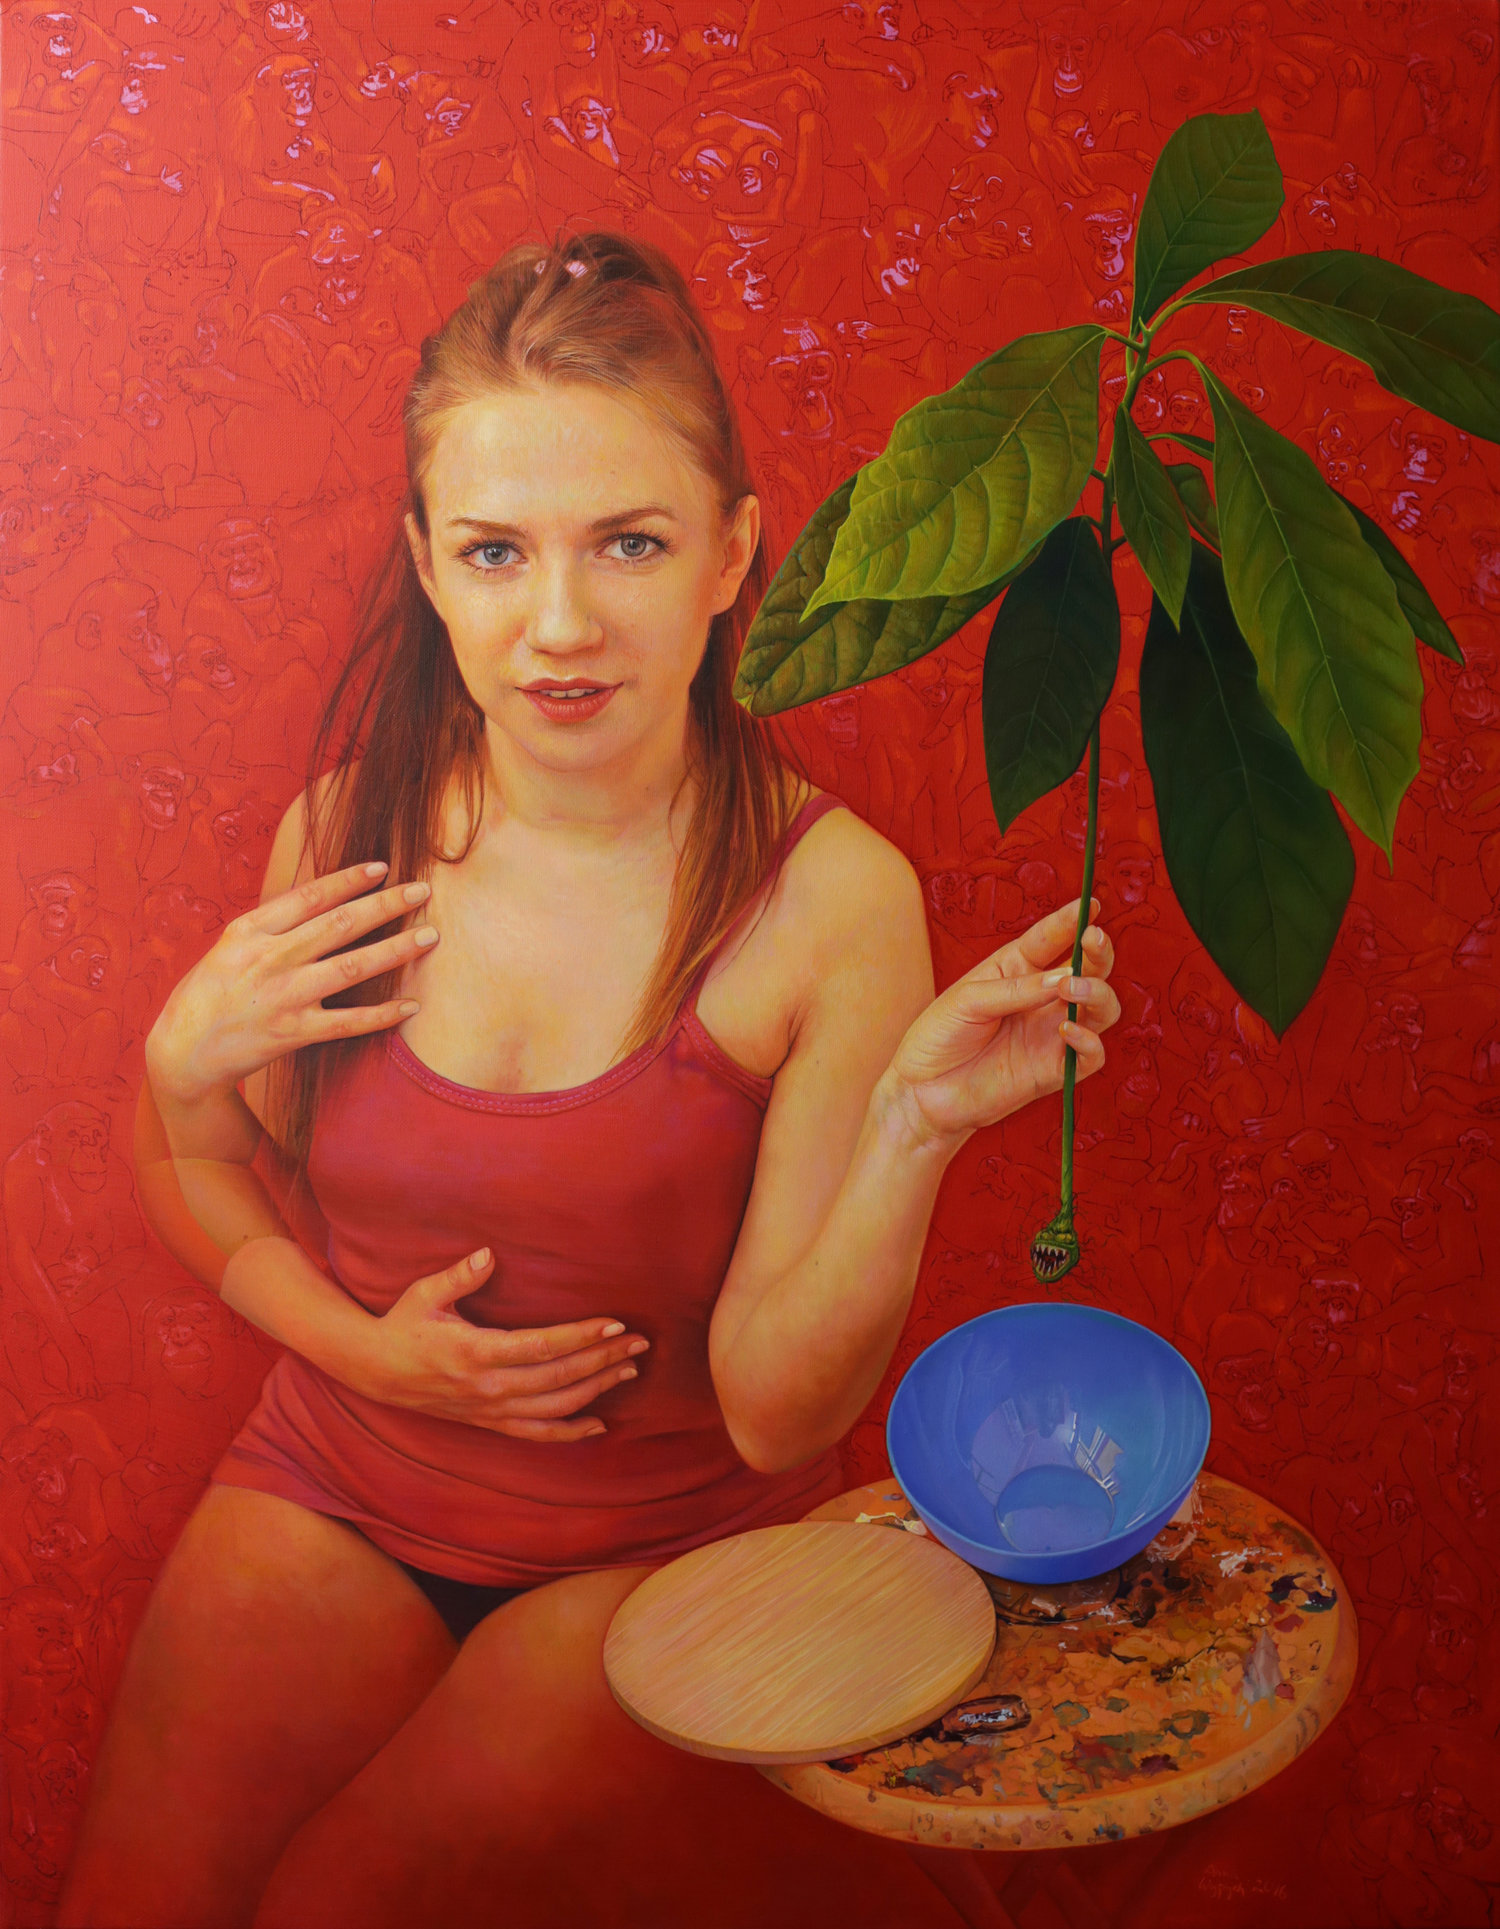 Anna Wypych  |  Red  |  Oil on canvas  |  35 ½ x 27 ½ inches or 90 x 70 cm